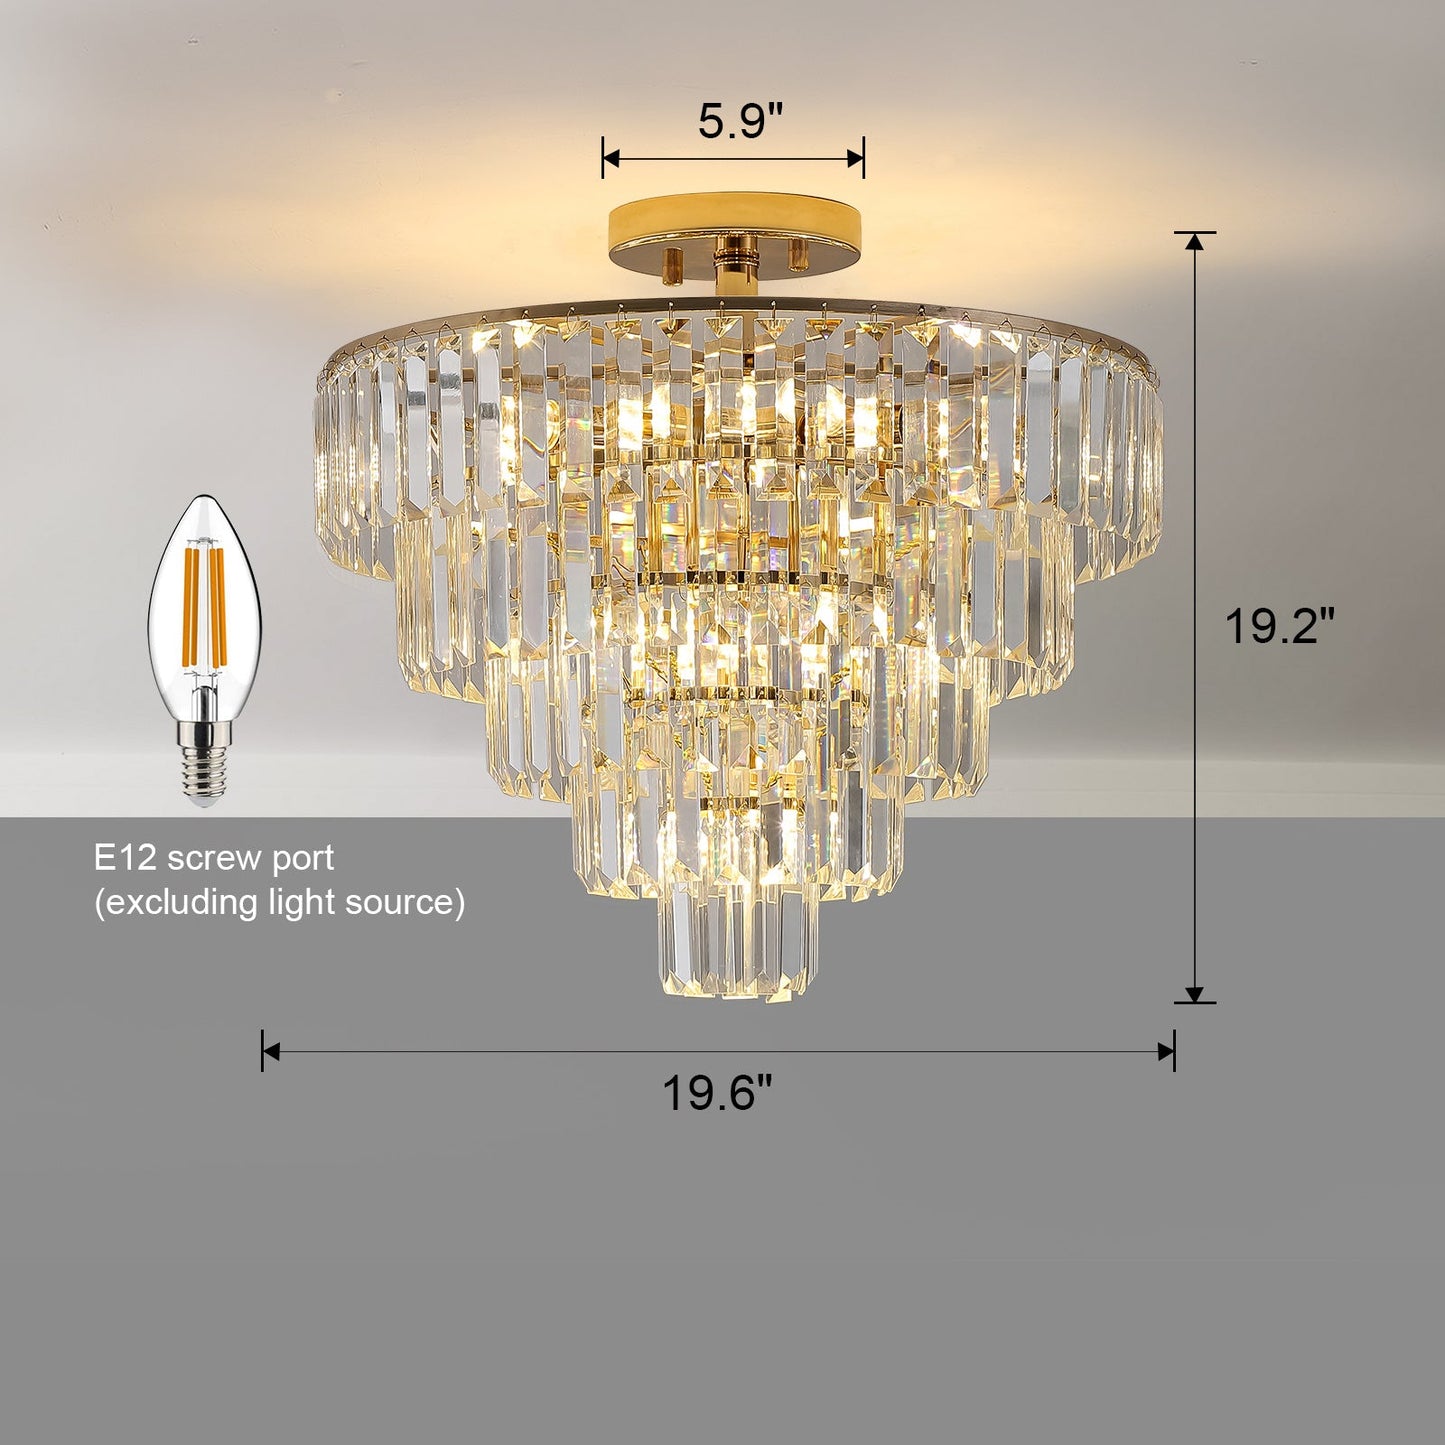 Gold Crystal Chandeliers,5-Tier Round Semi Flush Mount Chandelier Light Fixture,Large Contemporary Luxury Ceiling Lighting for Living Room Dining Room Bedroom Hallway Home Decor by Design